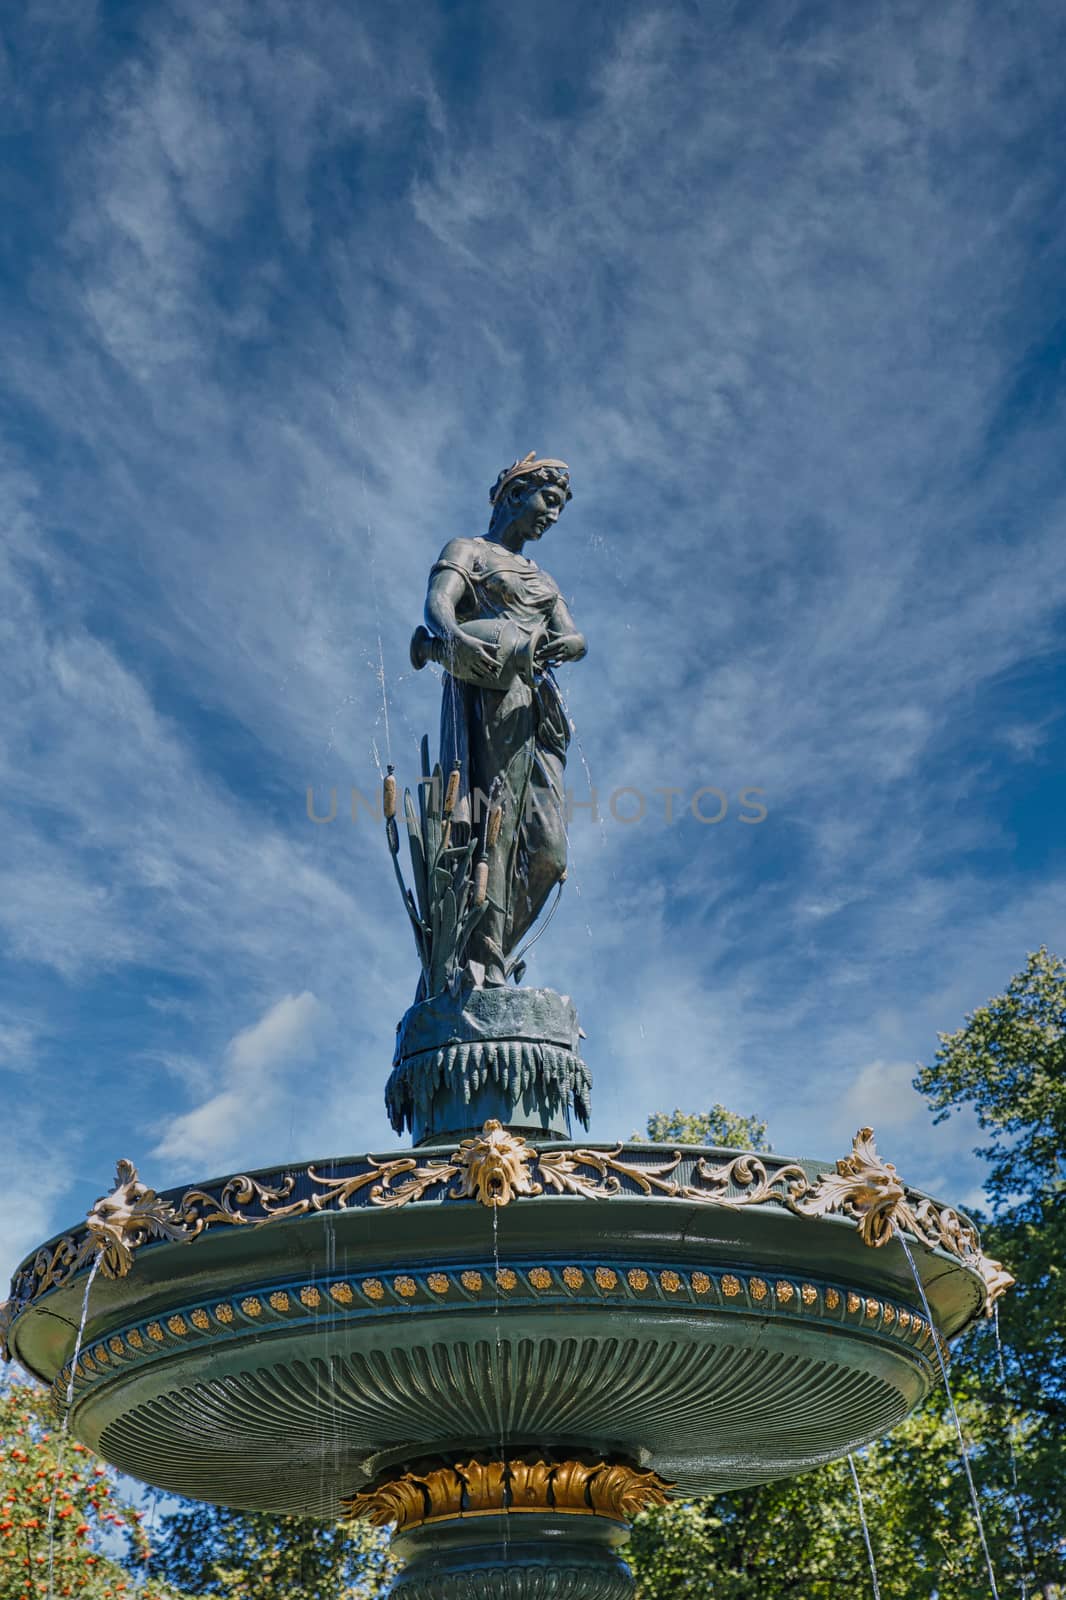 An old statue on a fountain in a public garden